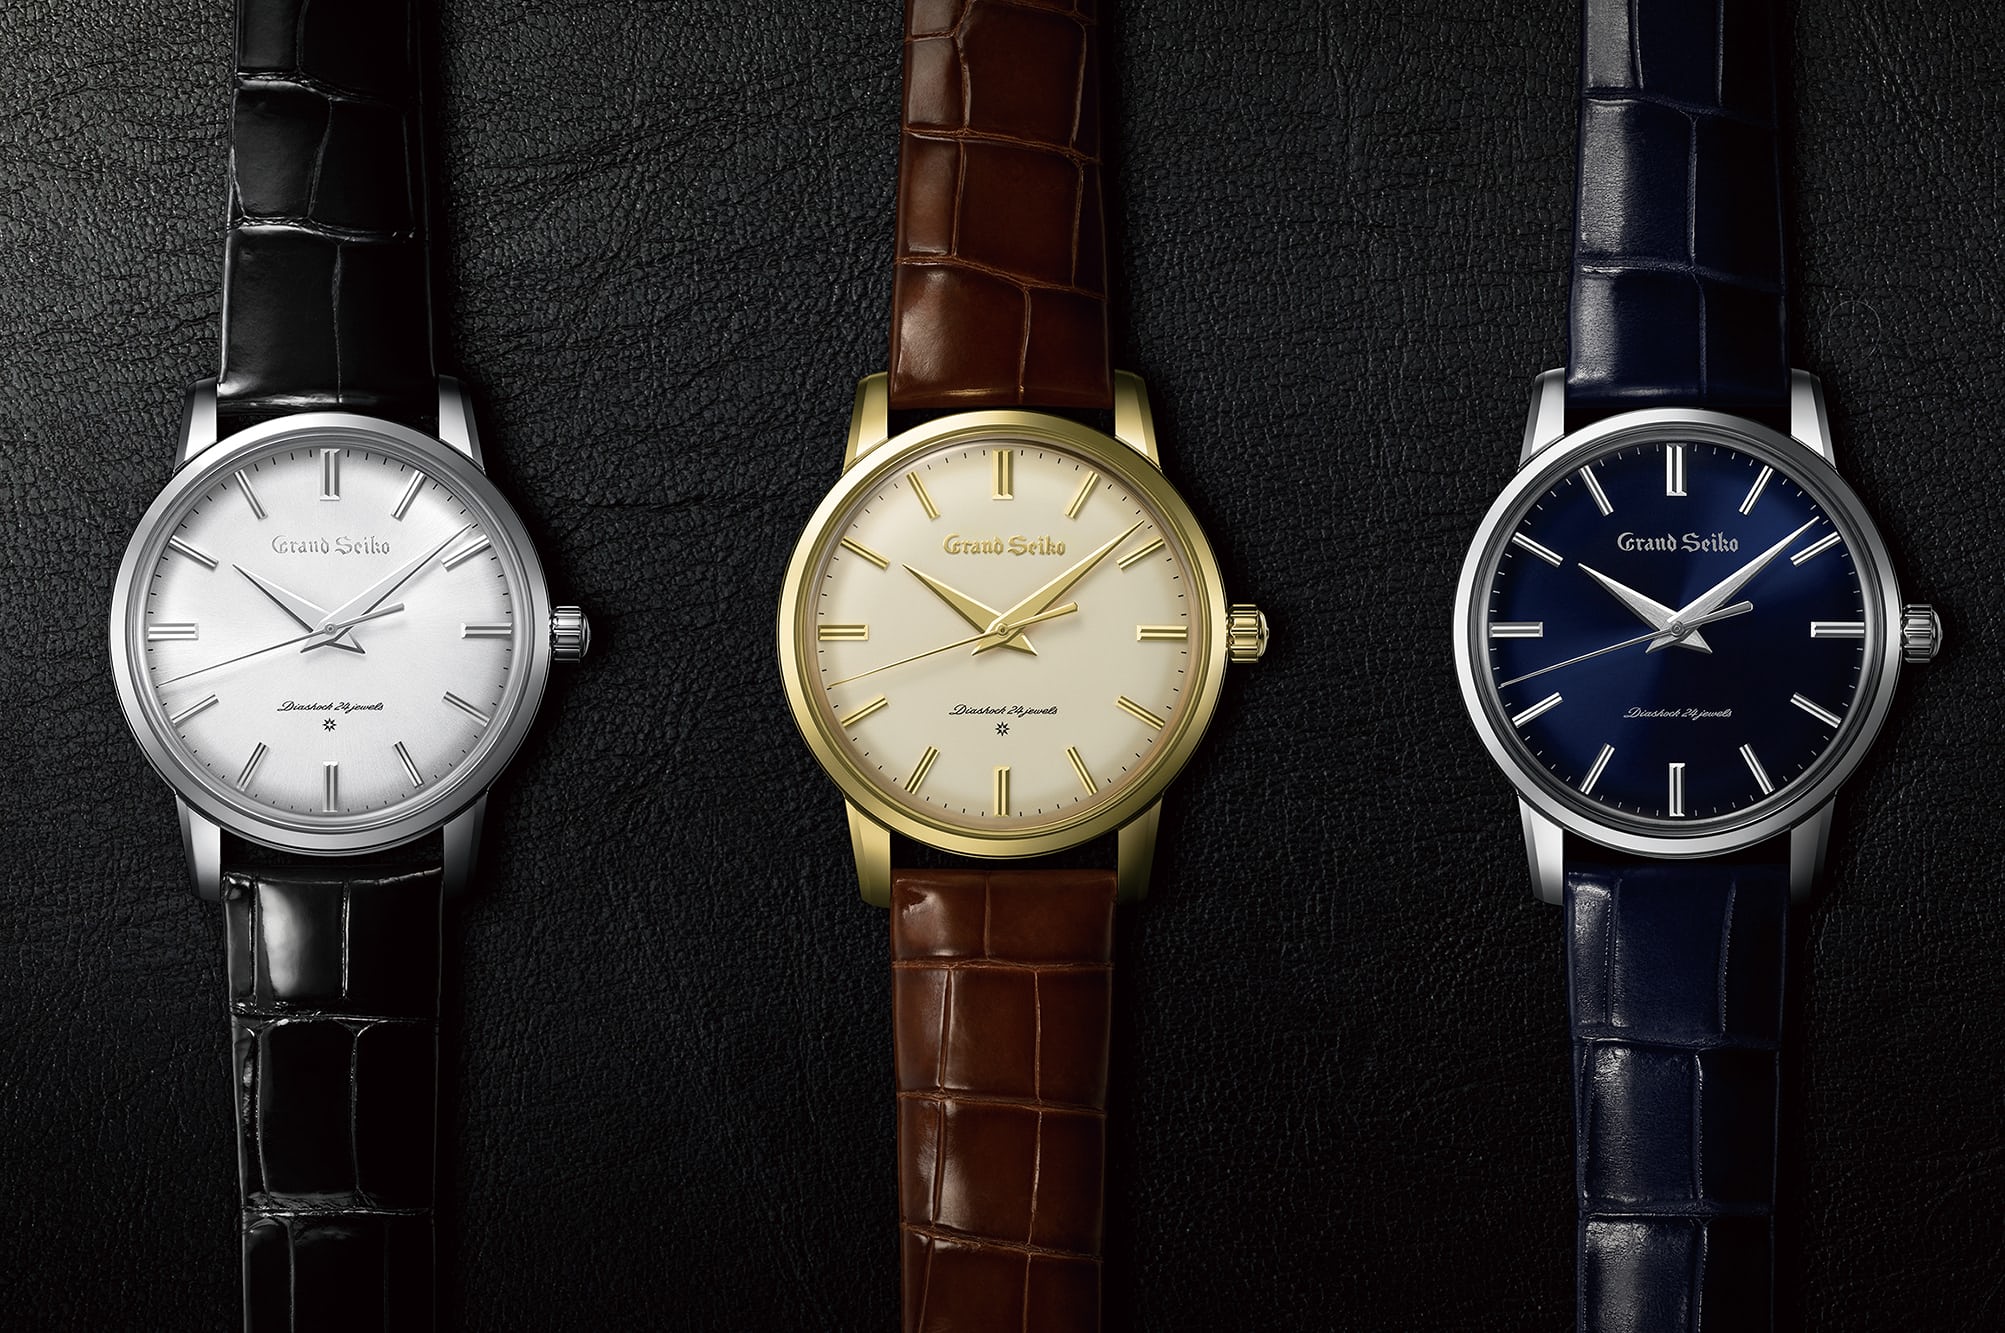 Introducing The Re-Creations Of The First Grand Seiko For The 60th  Anniversary Of GS - SBGW259, SBGW258, SBGW257